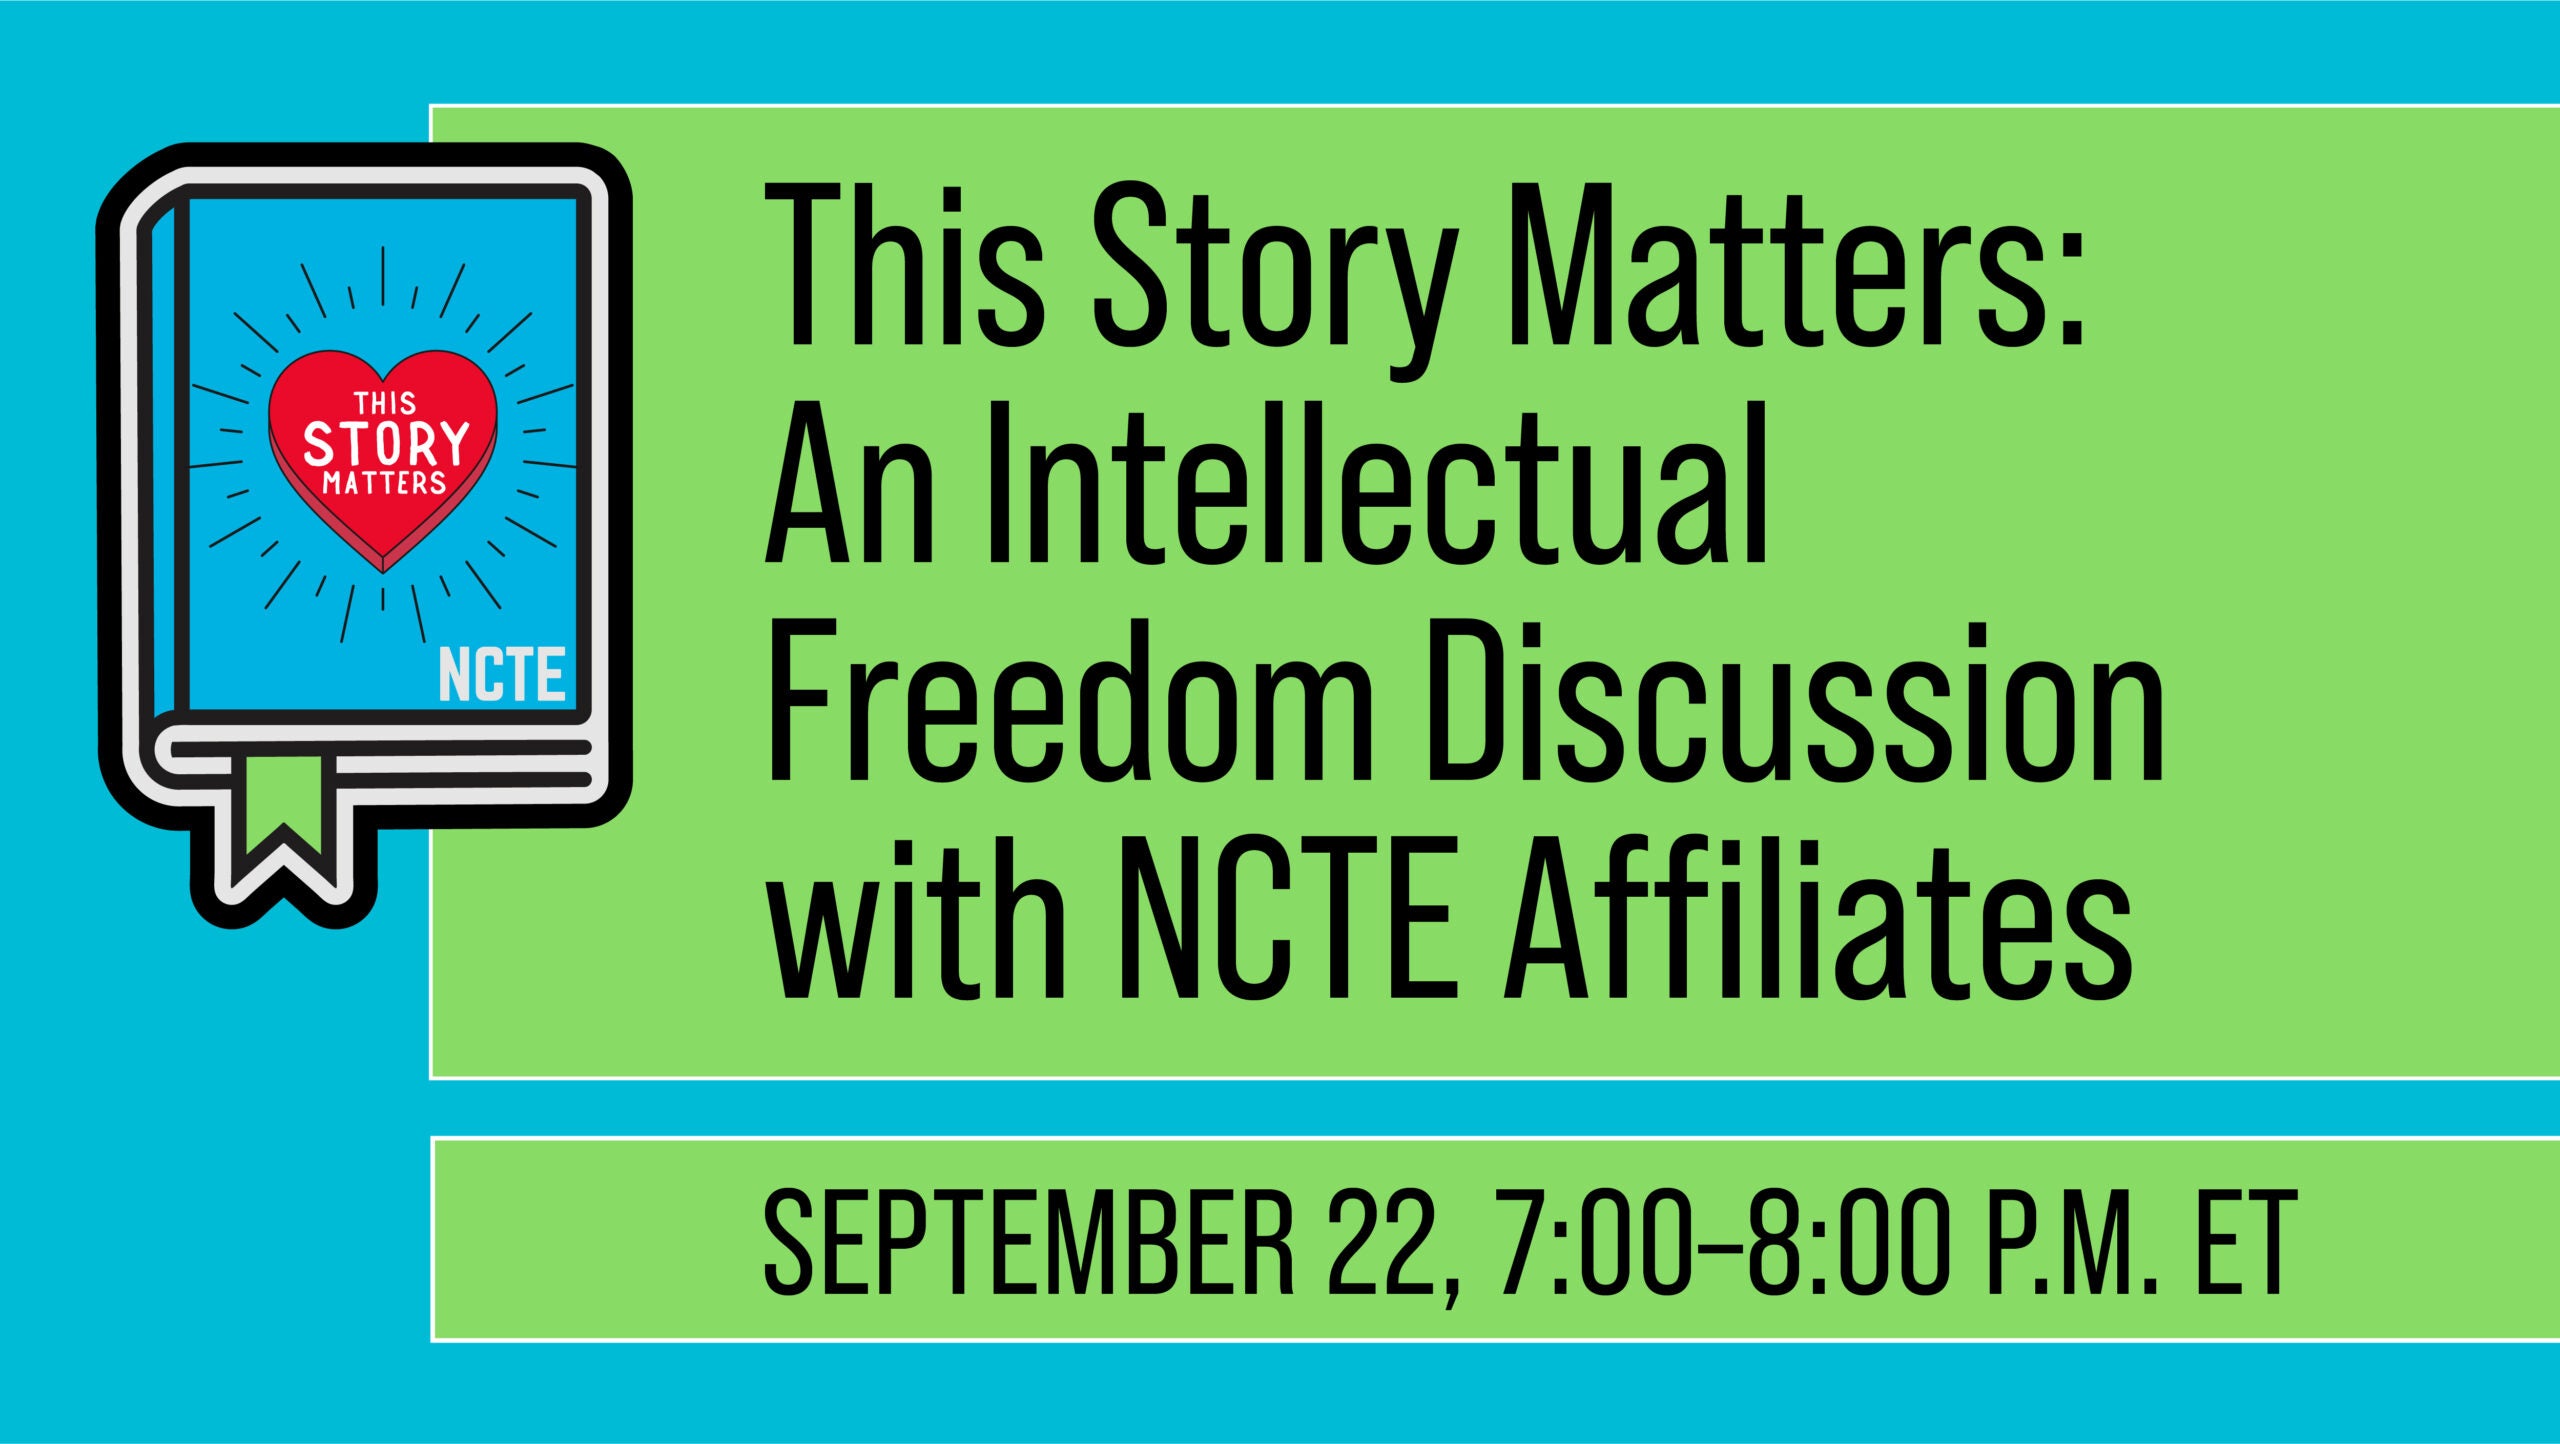 This Story Matters: An Intellectual Freedom Discussion with NCTE Affiliates